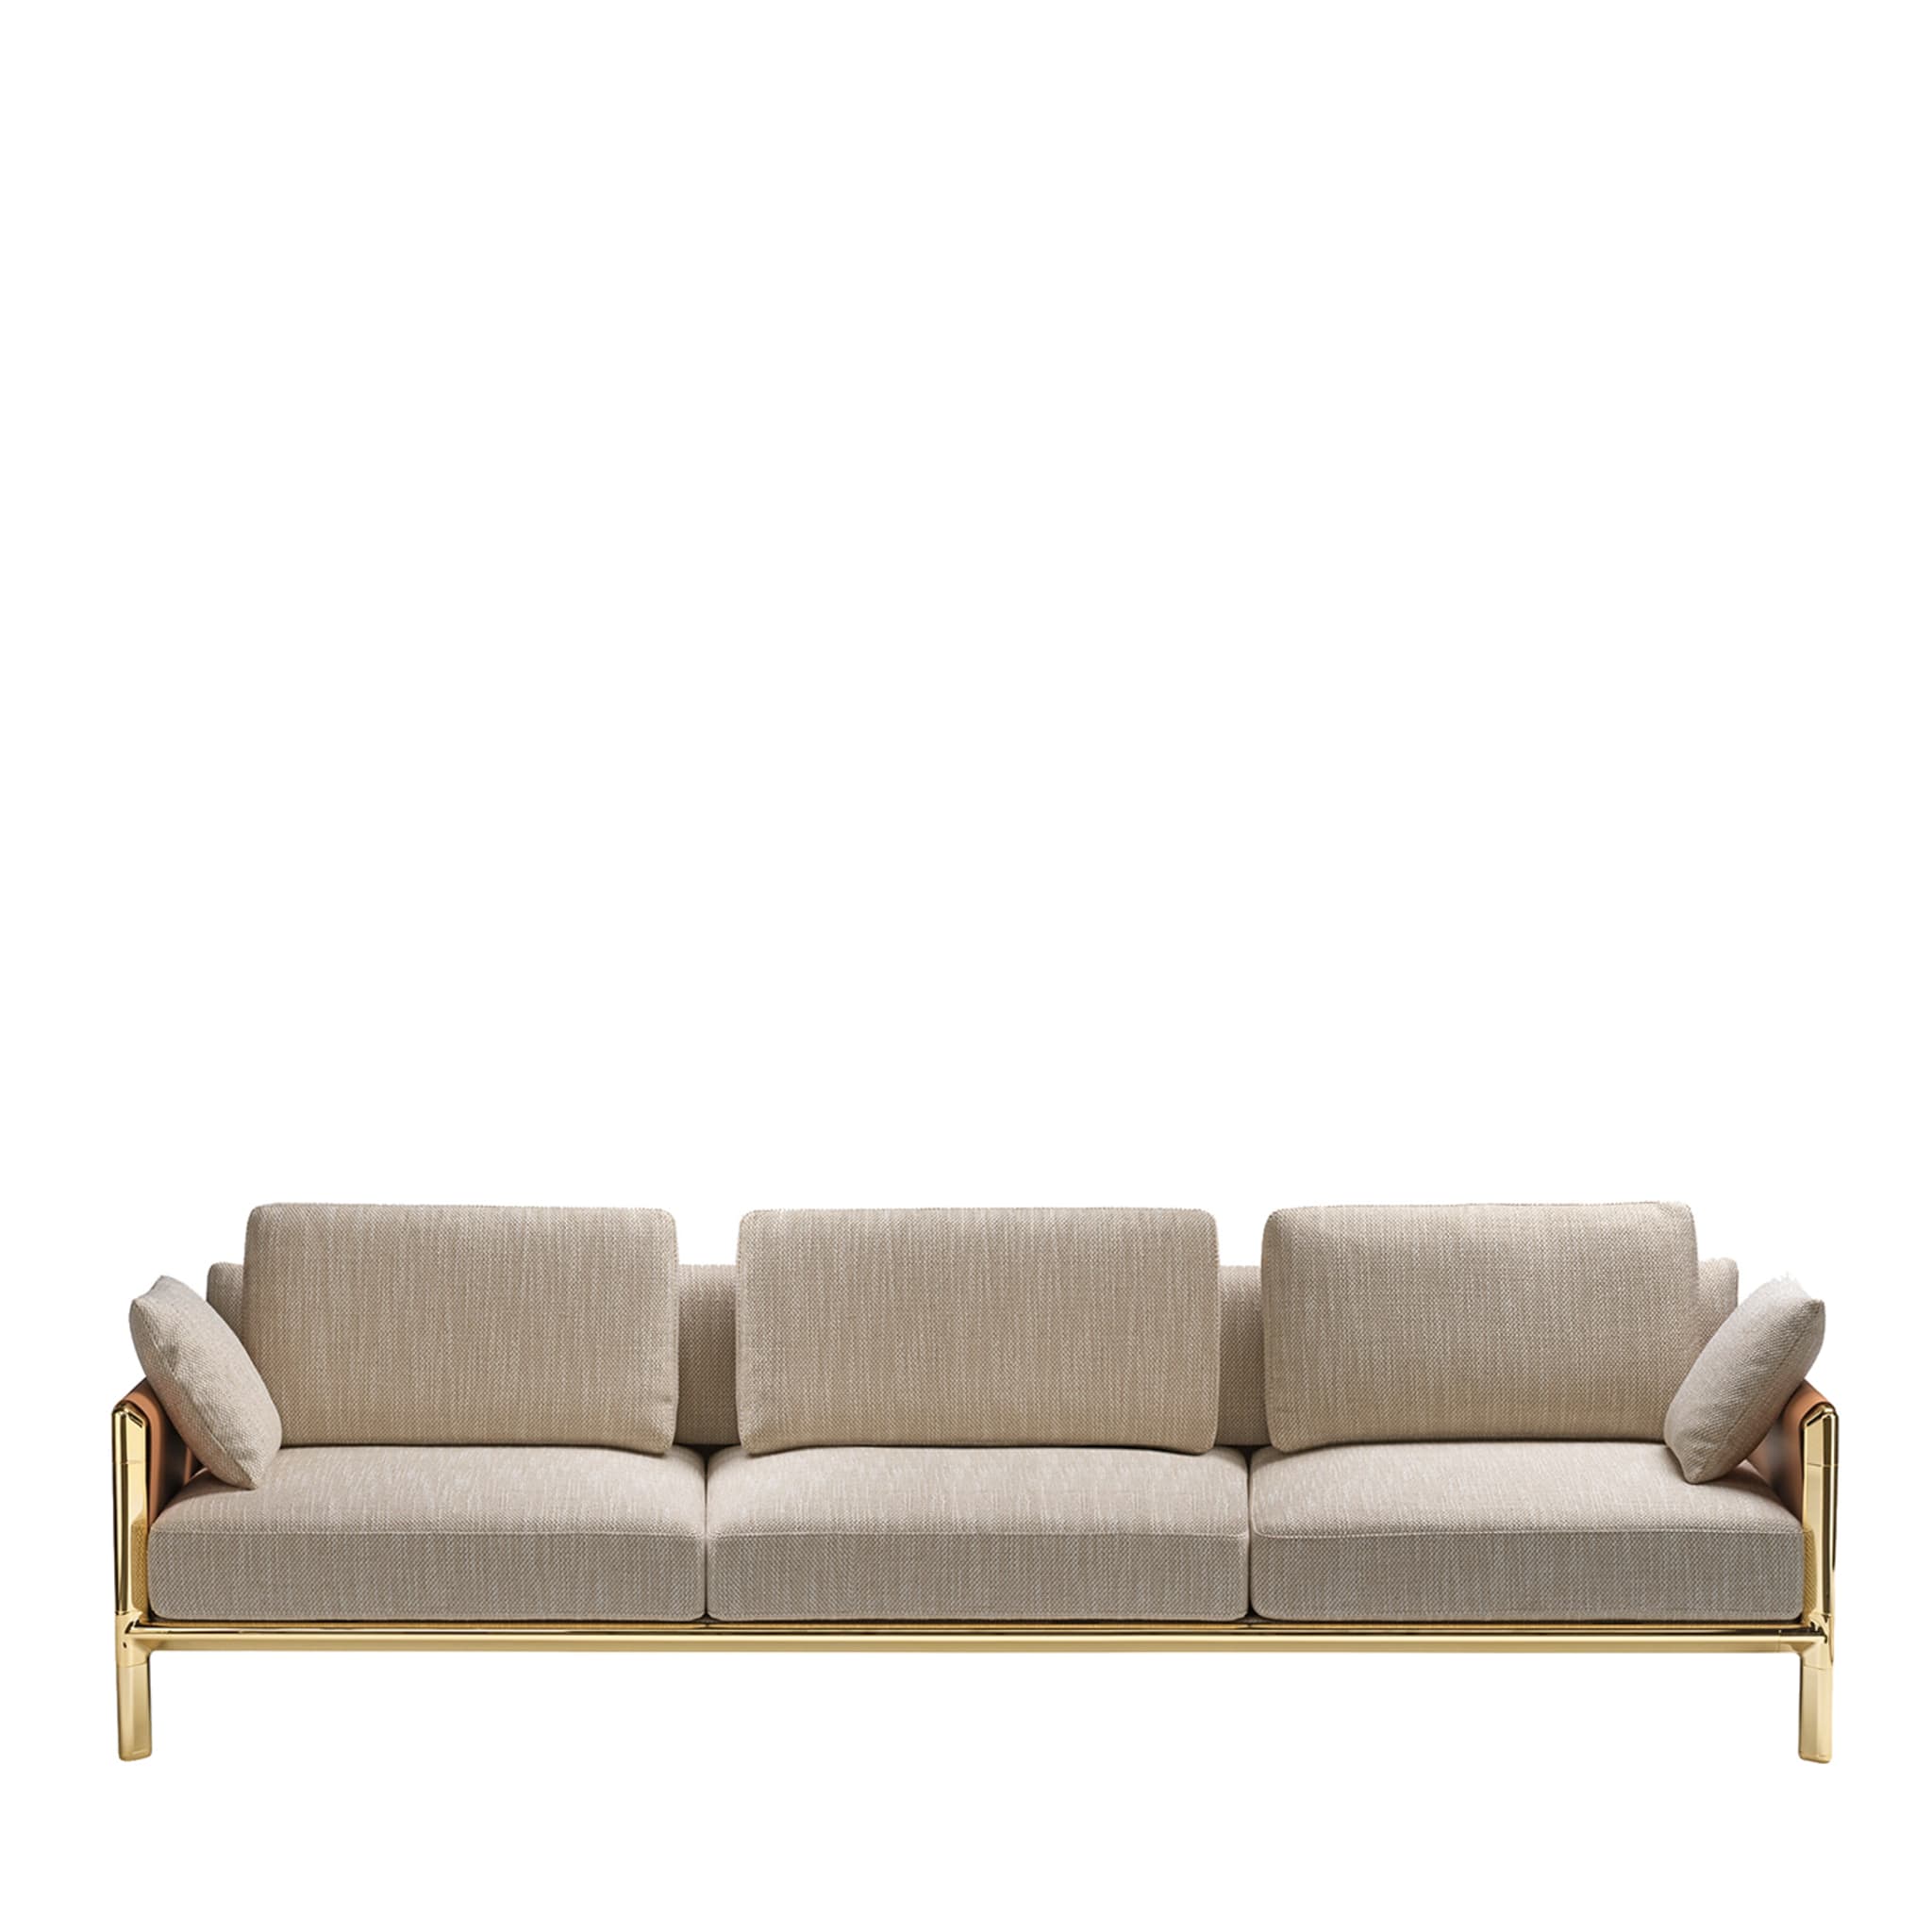 Frame Gold/Gray Sofa by Stefano Giovannoni - Main view